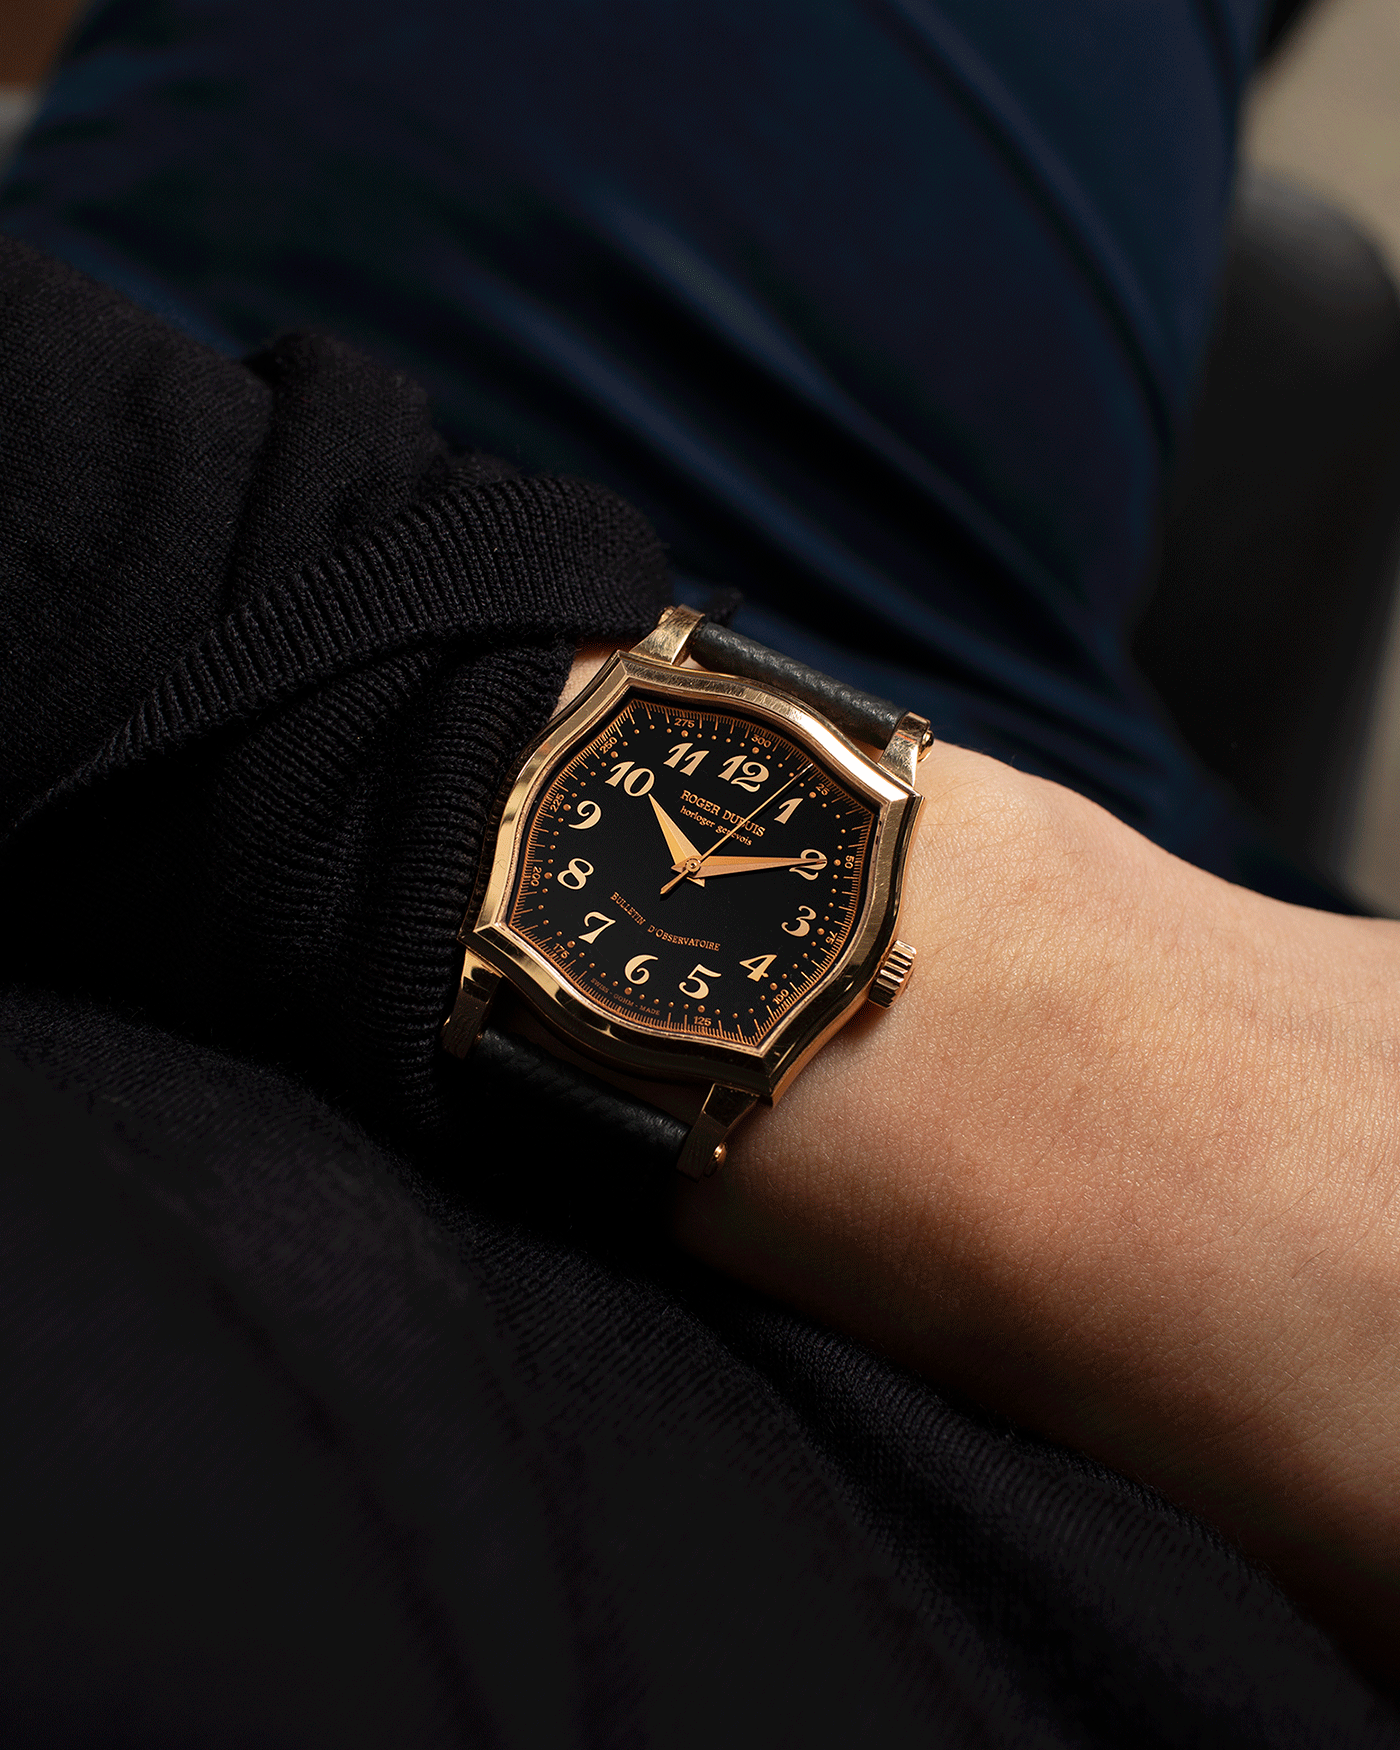 Brand: Roger Dubuis Year: 2000’s Model: Sympathie 37 Material: 18k Yellow Gold Movement: Cal RD 57 Case Diameter: 37mm Strap: Molequin X S.Song Black Grained CalfBrand: Roger Dubuis Year: 2000’s Model: Sympathie 37 Material: 18k Yellow Gold Movement: Cal RD 57 Case Diameter: 37mm Strap: Molequin X S.Song Black Grained Calf